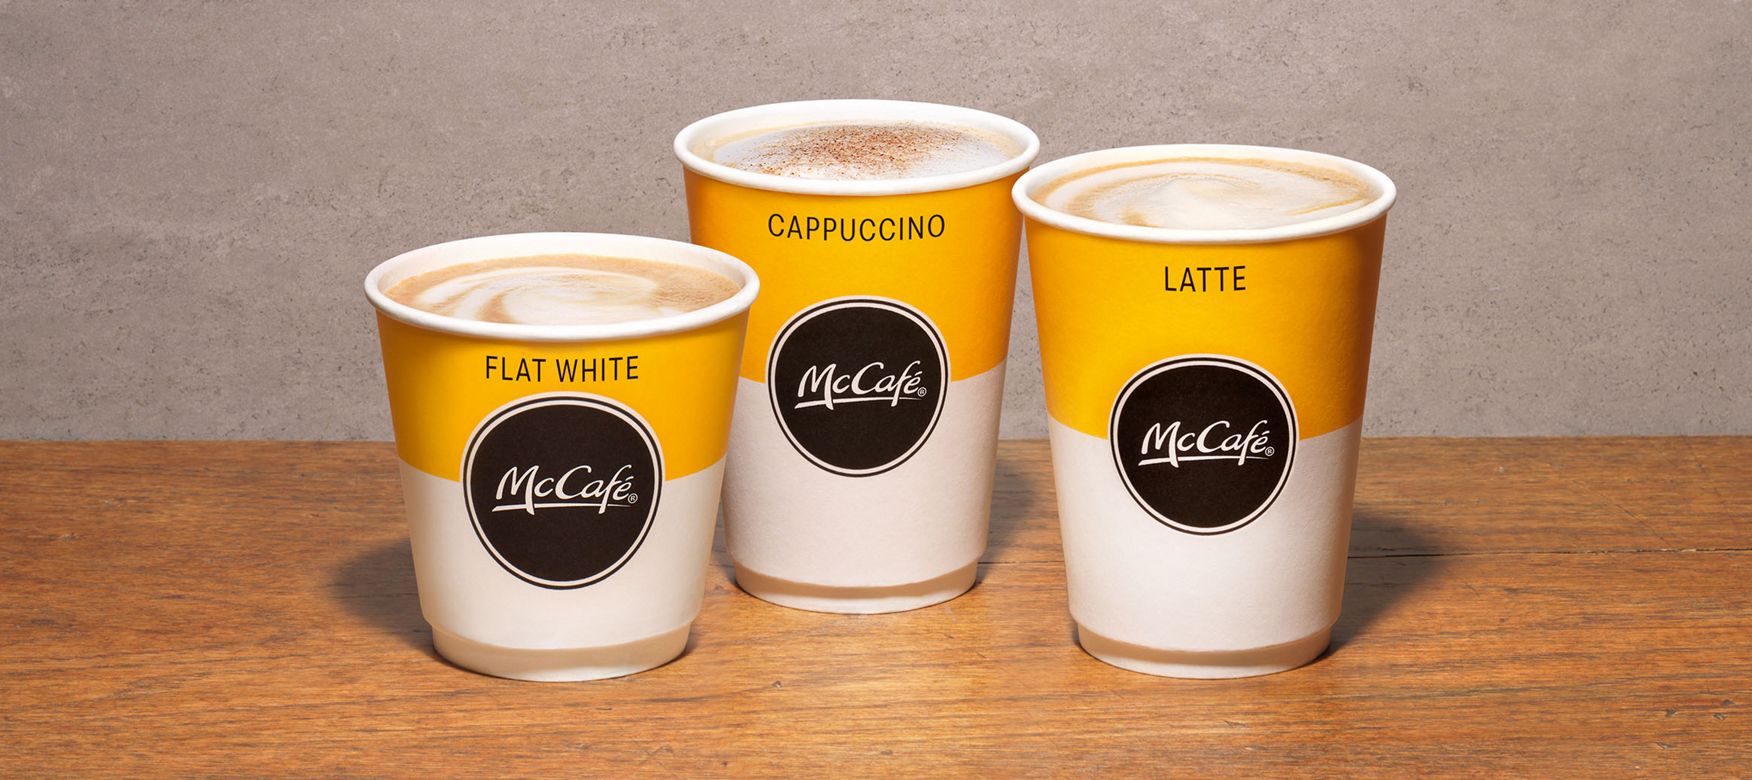  McCafe range of cups standing on a wooden table